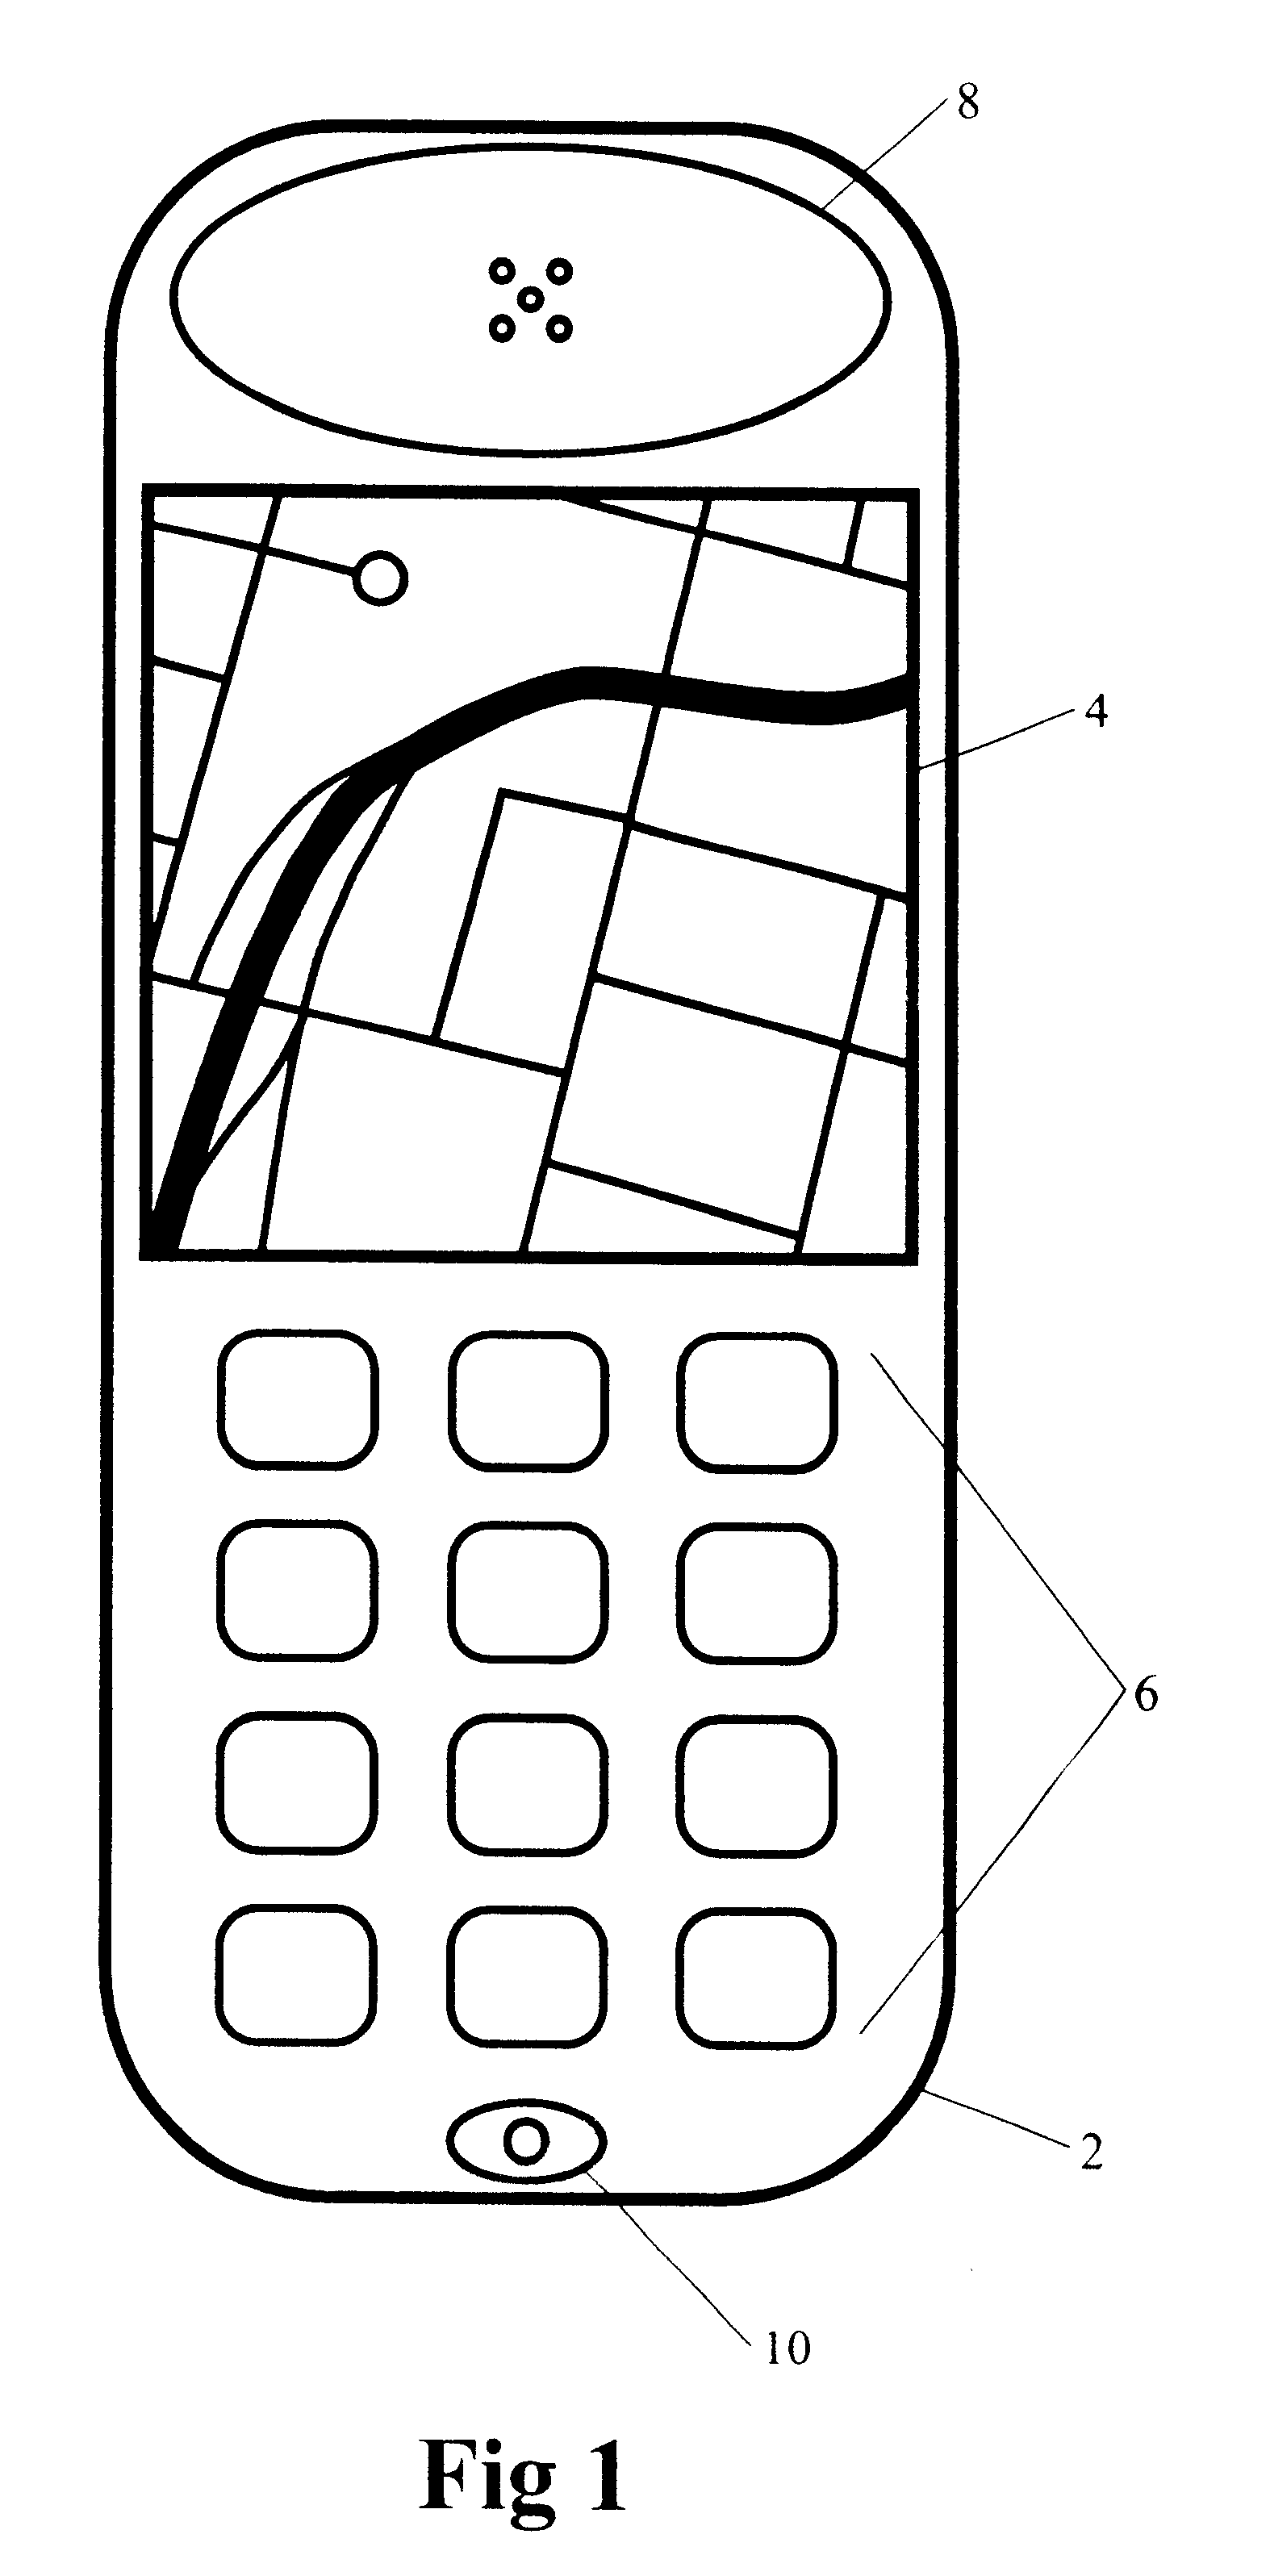 Method and apparatus for orienting a map display in a mobile or portable device